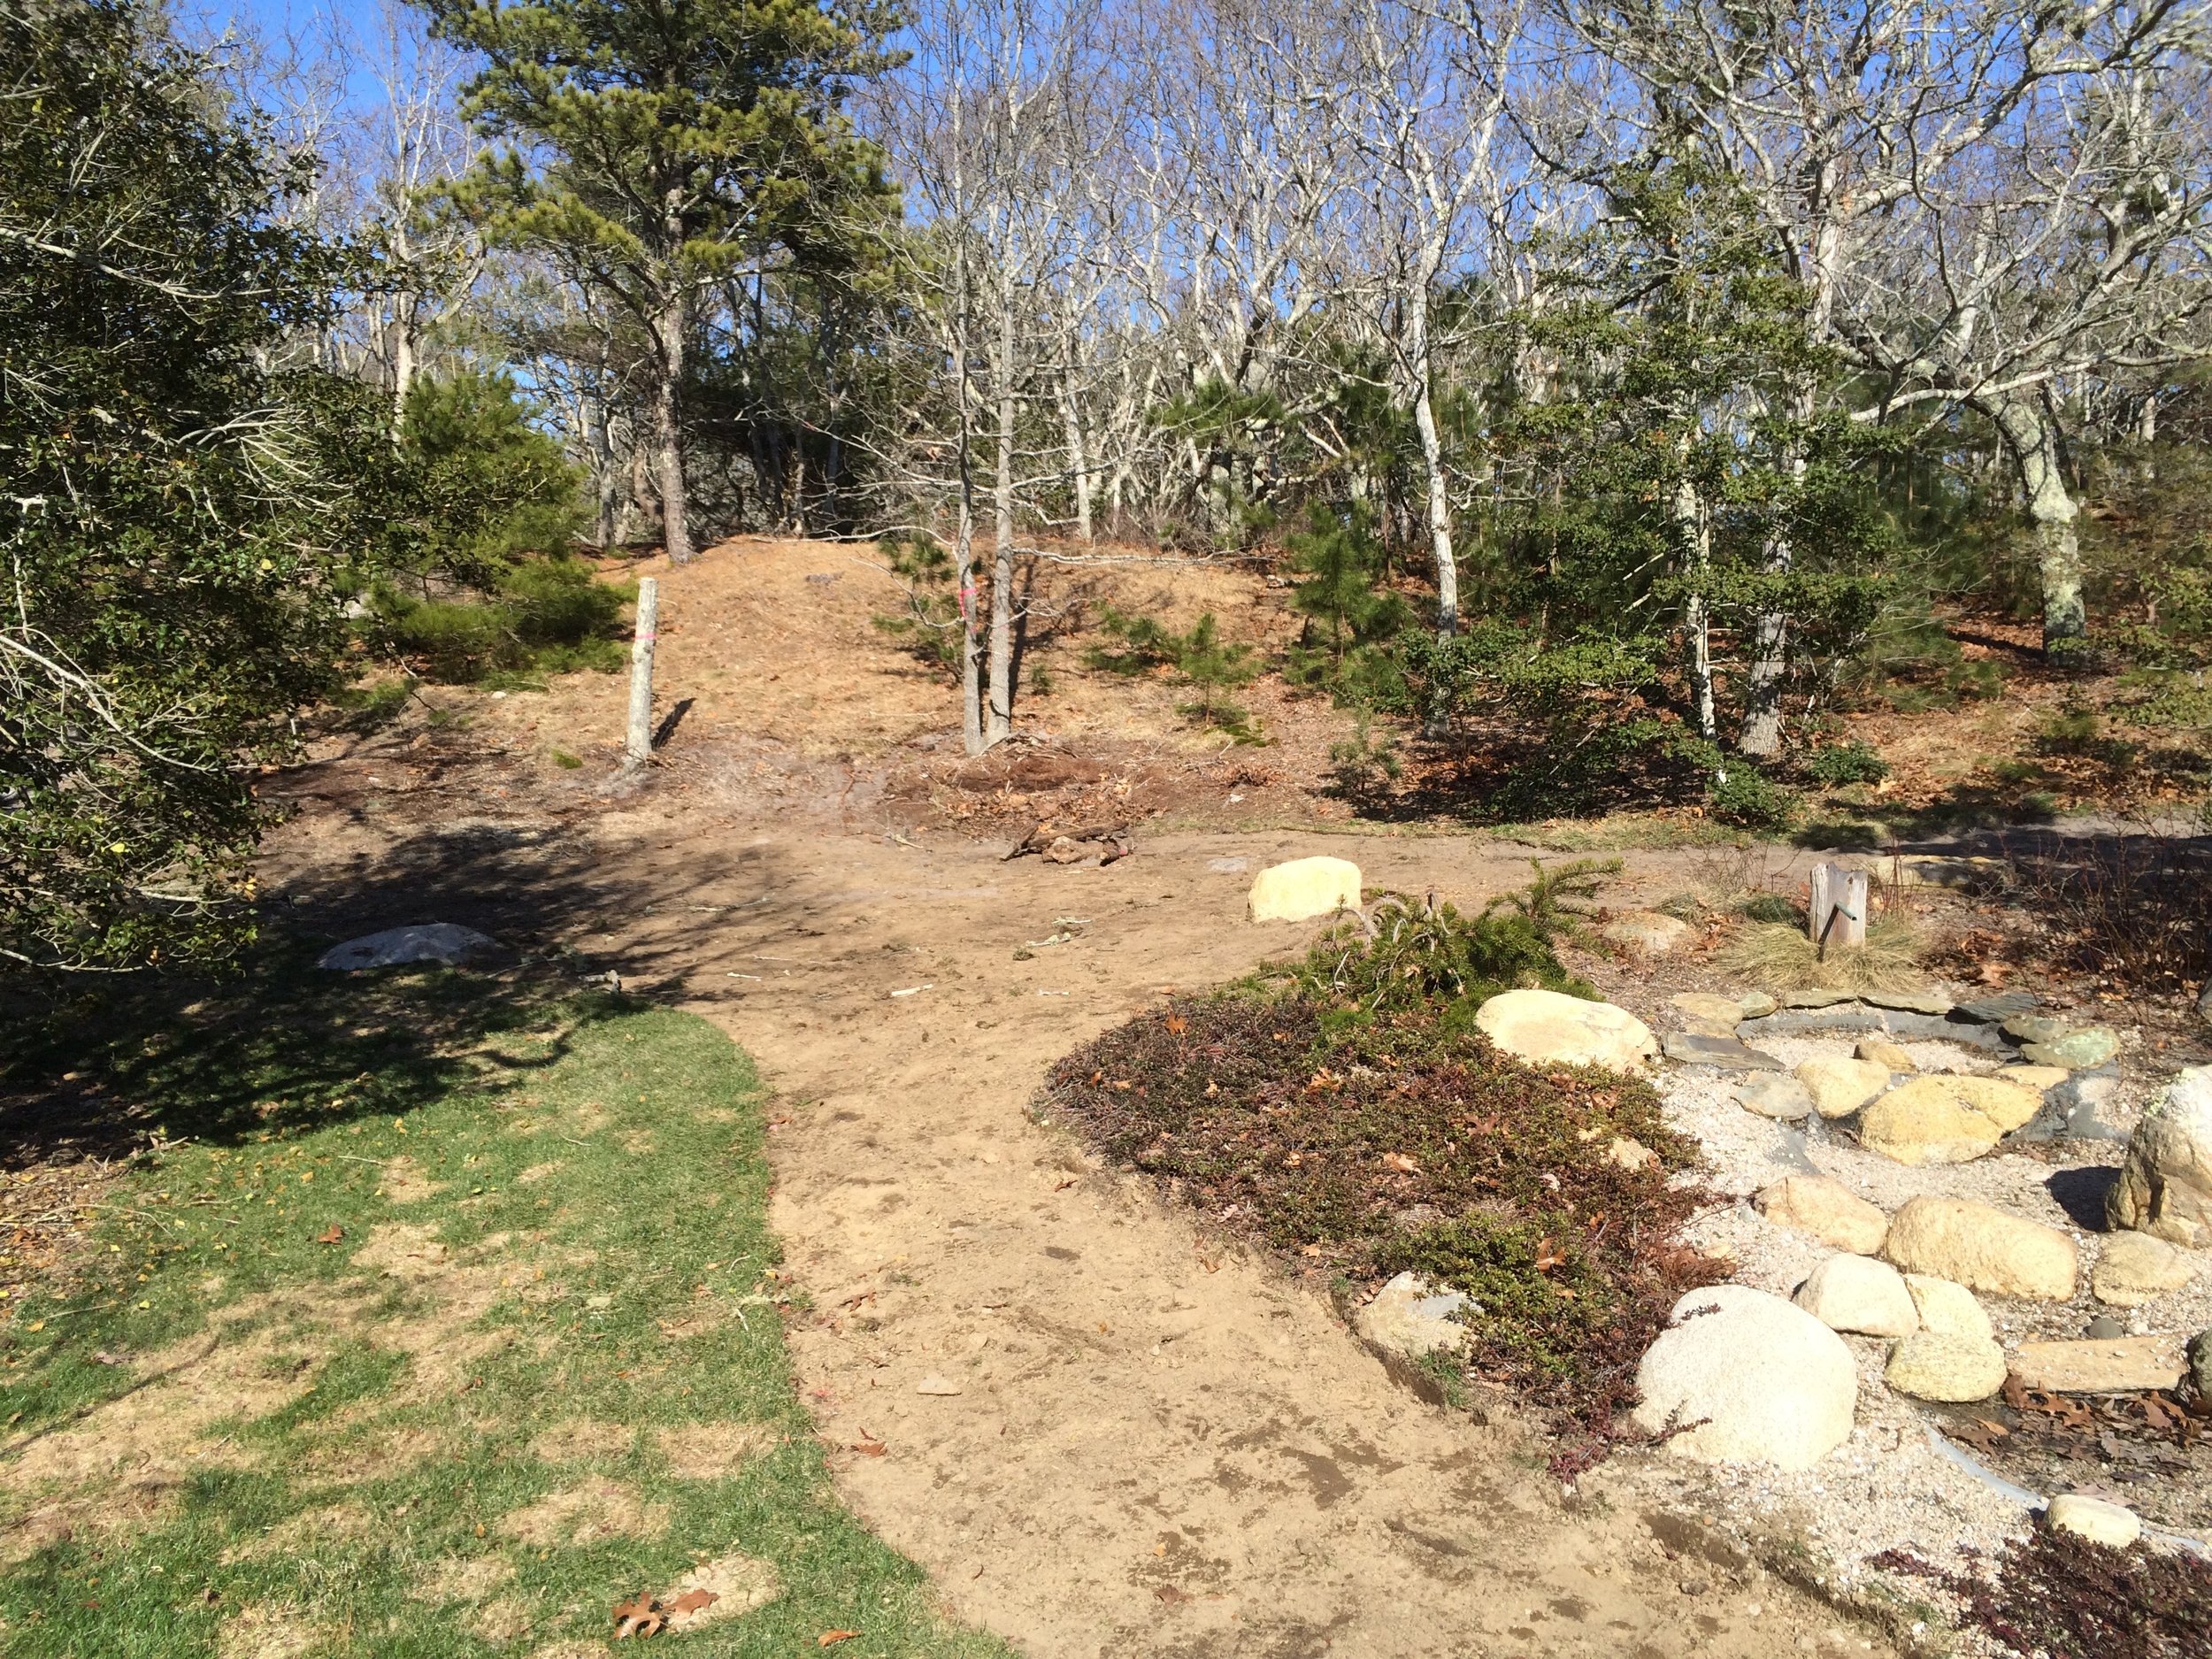   Cape Cod  - Progress picture of naturalization process. Removing gratuitous lawn to introduce natives back to property. 